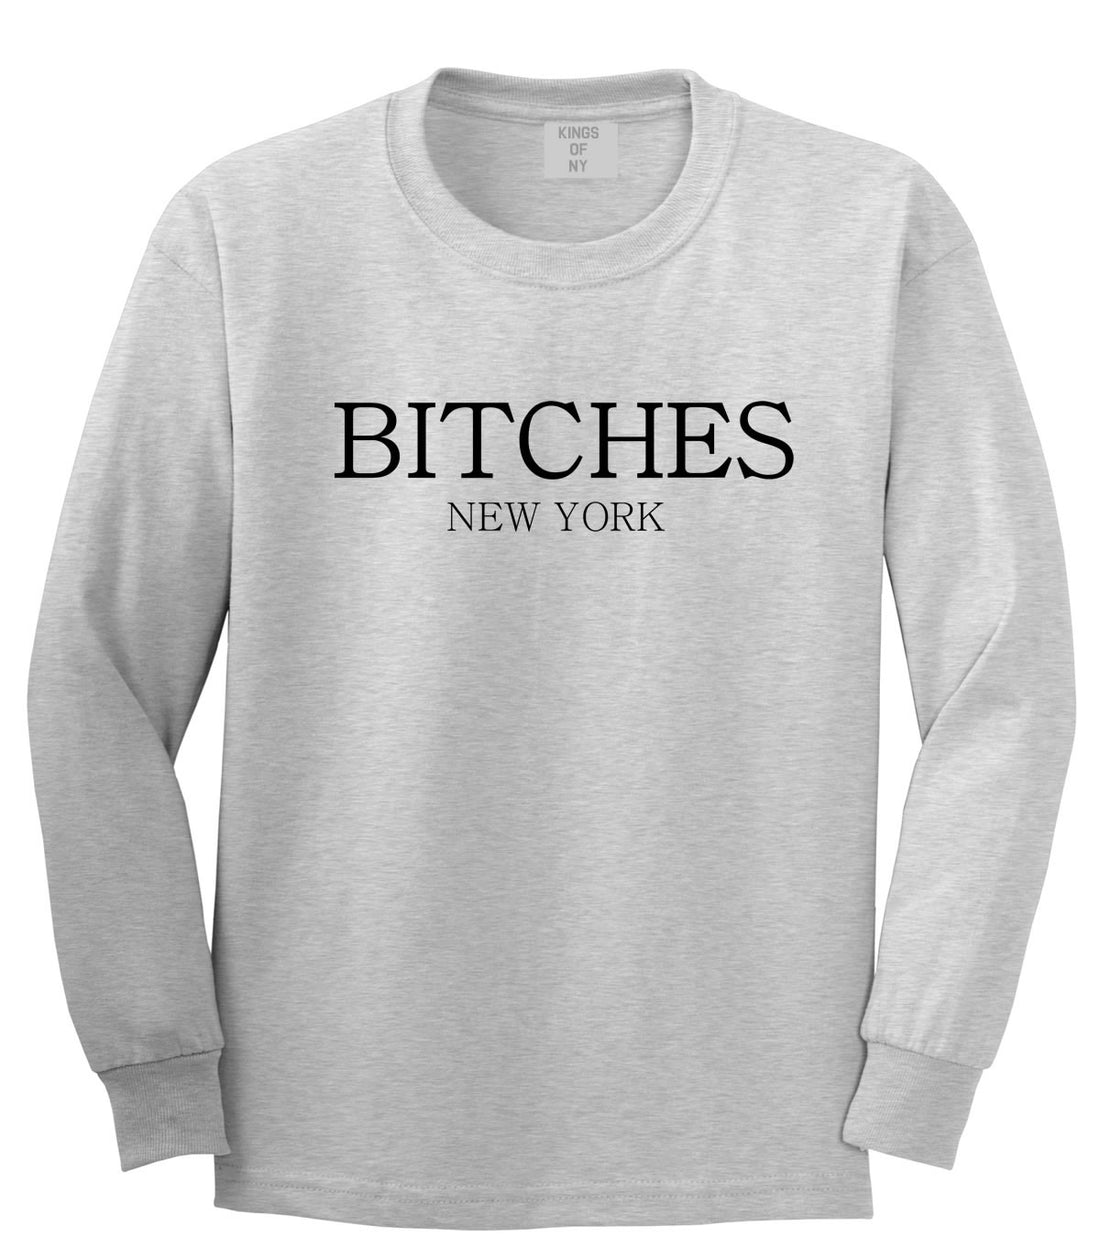  Bitches New York Long Sleeve T-Shirt in Grey by Kings Of NY